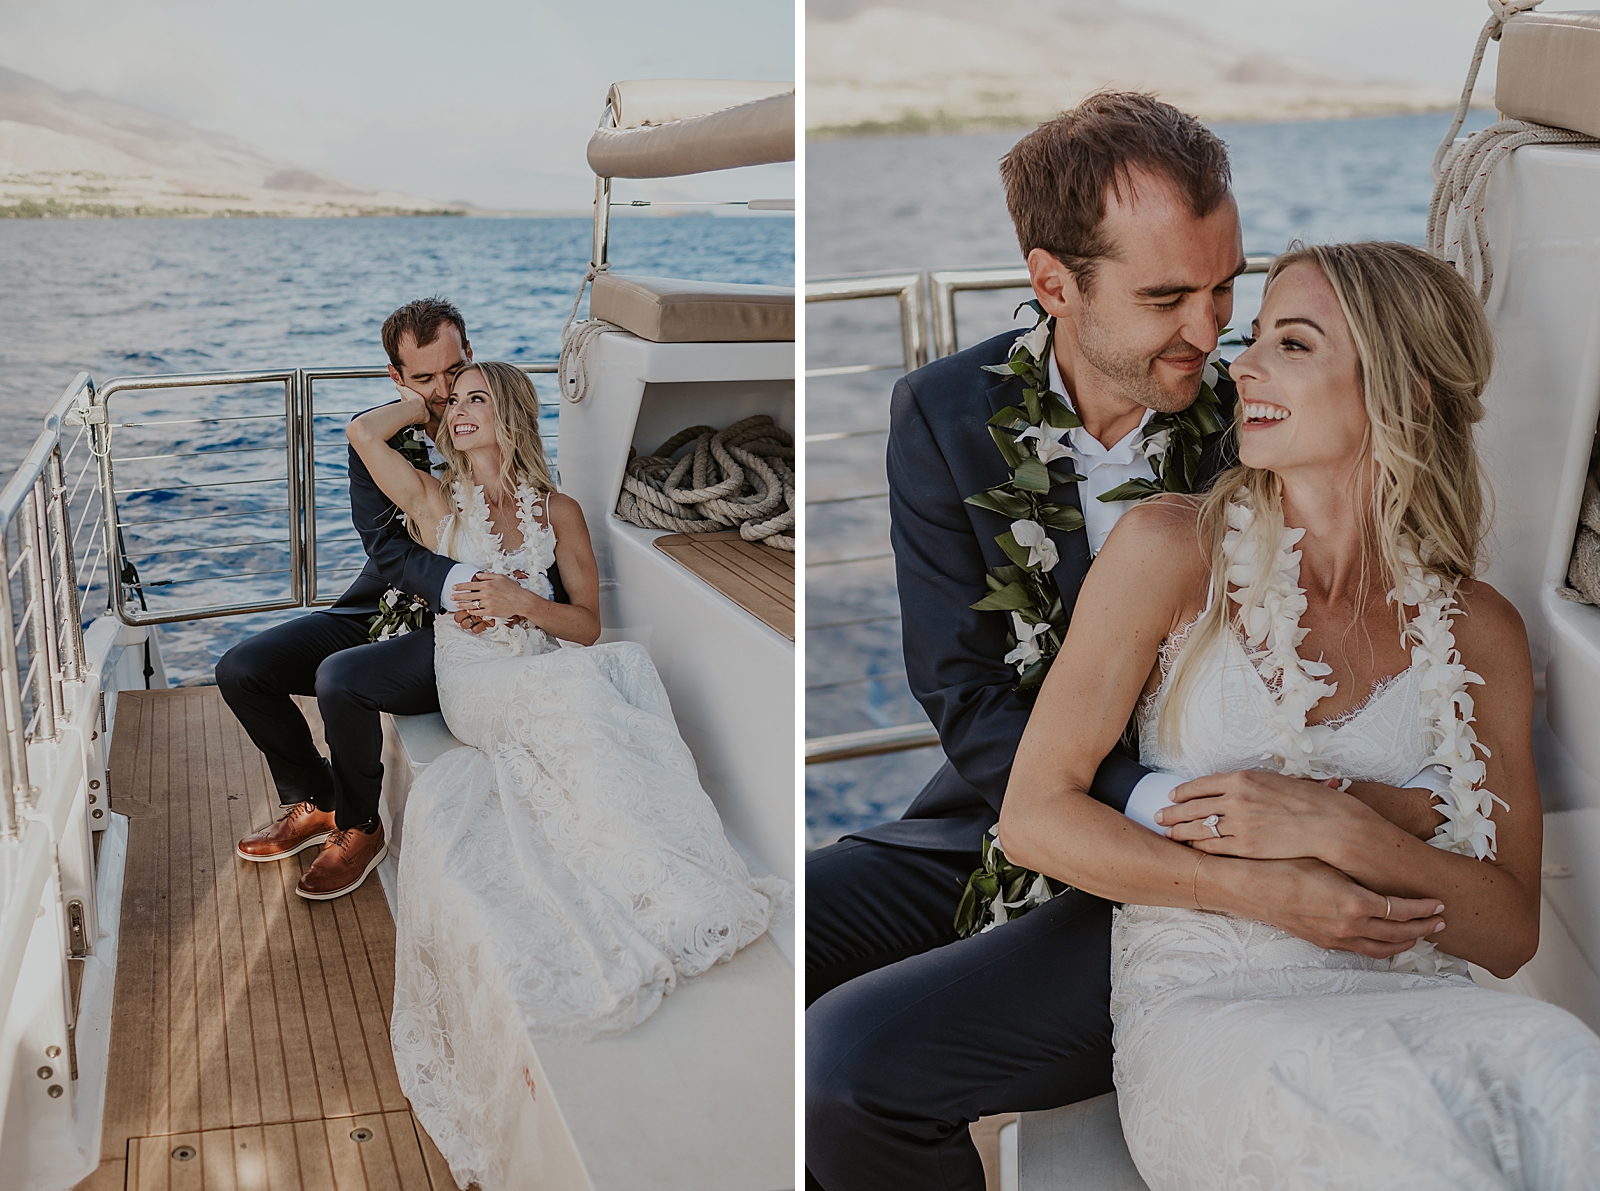 Bride sitting and leaning on Groom while of the boat